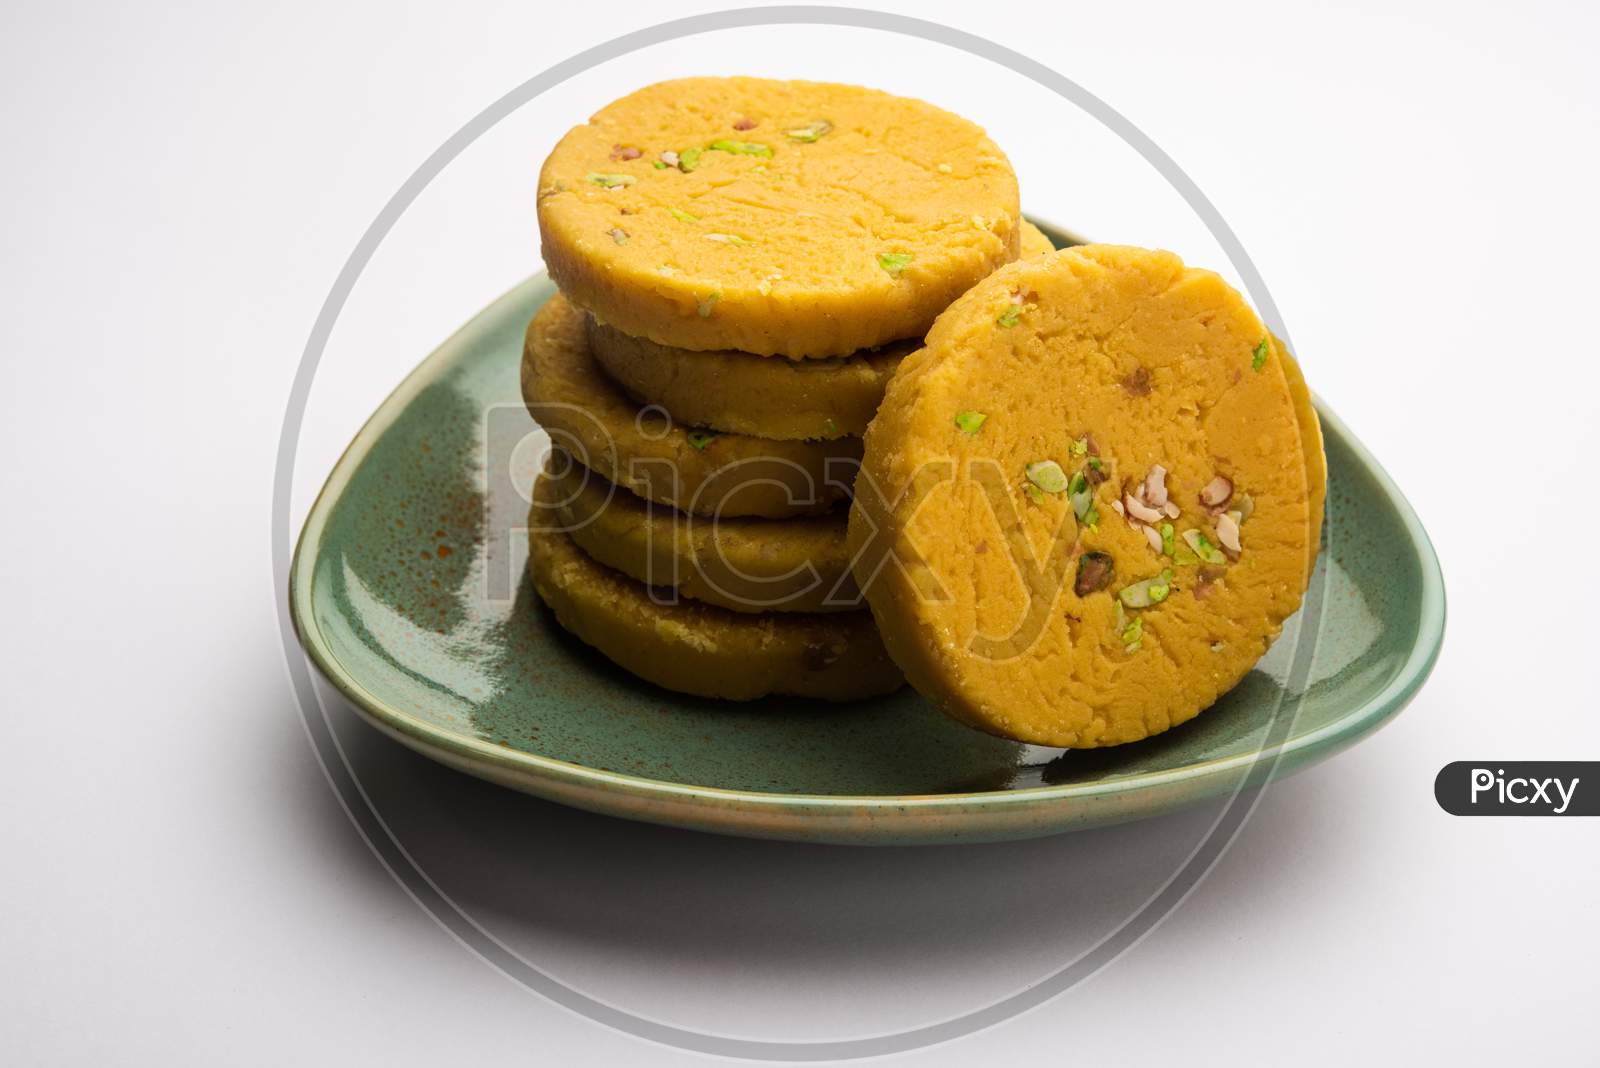 Sohan Halwa Or Halva, Popular Sweet Recipe From Ajmer, India. Served In A Plate